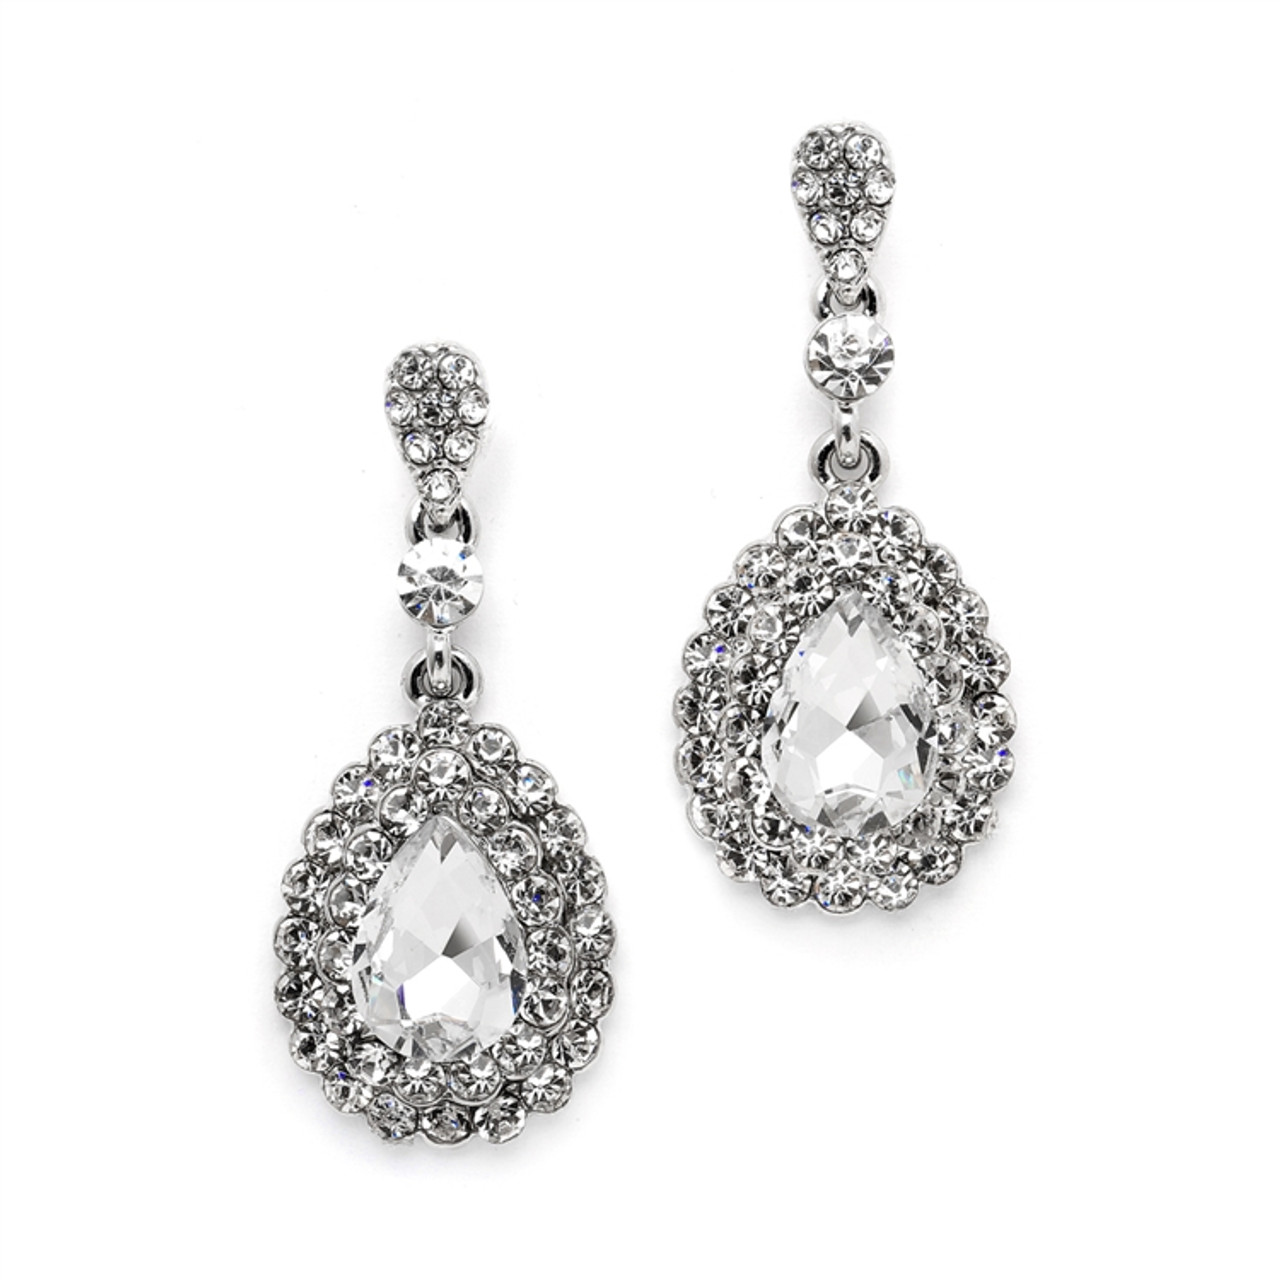 Mariell Dimensional Crystal Dangle Earrings for Brides or Proms 4534E-CR-S